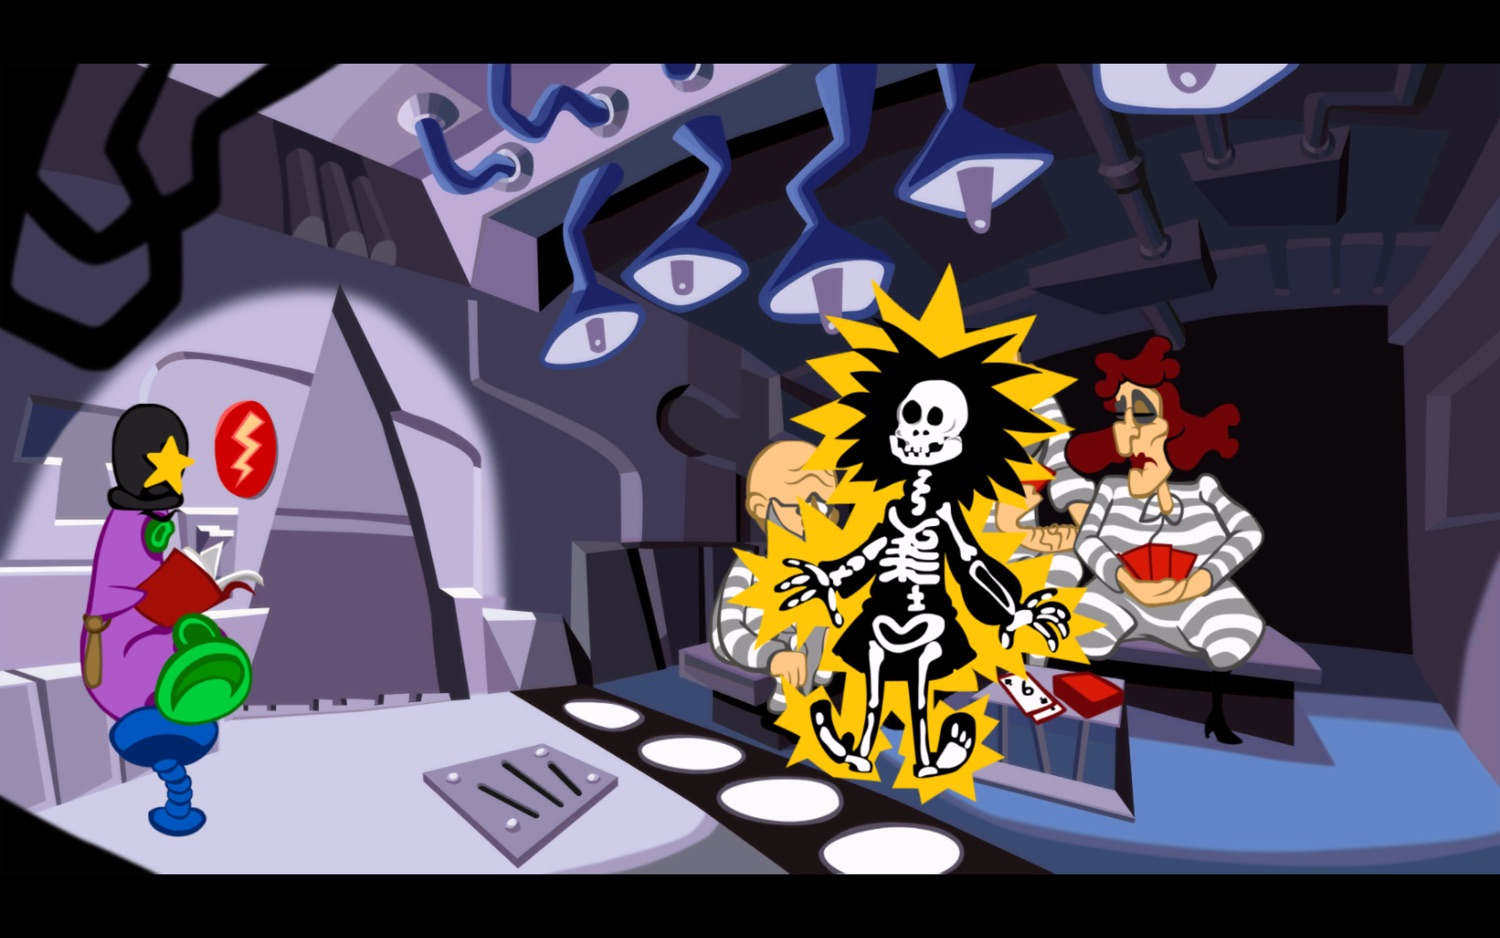 Screenshot of the Day of the Tentacle jail. We are in the future, and there is a tentacle jailer sitting to the left. In the middle, Laverne is being shocked by the electric bars of the jail and you can see her skeleton. Behind her sits the rest of the family, bored and playing cards.